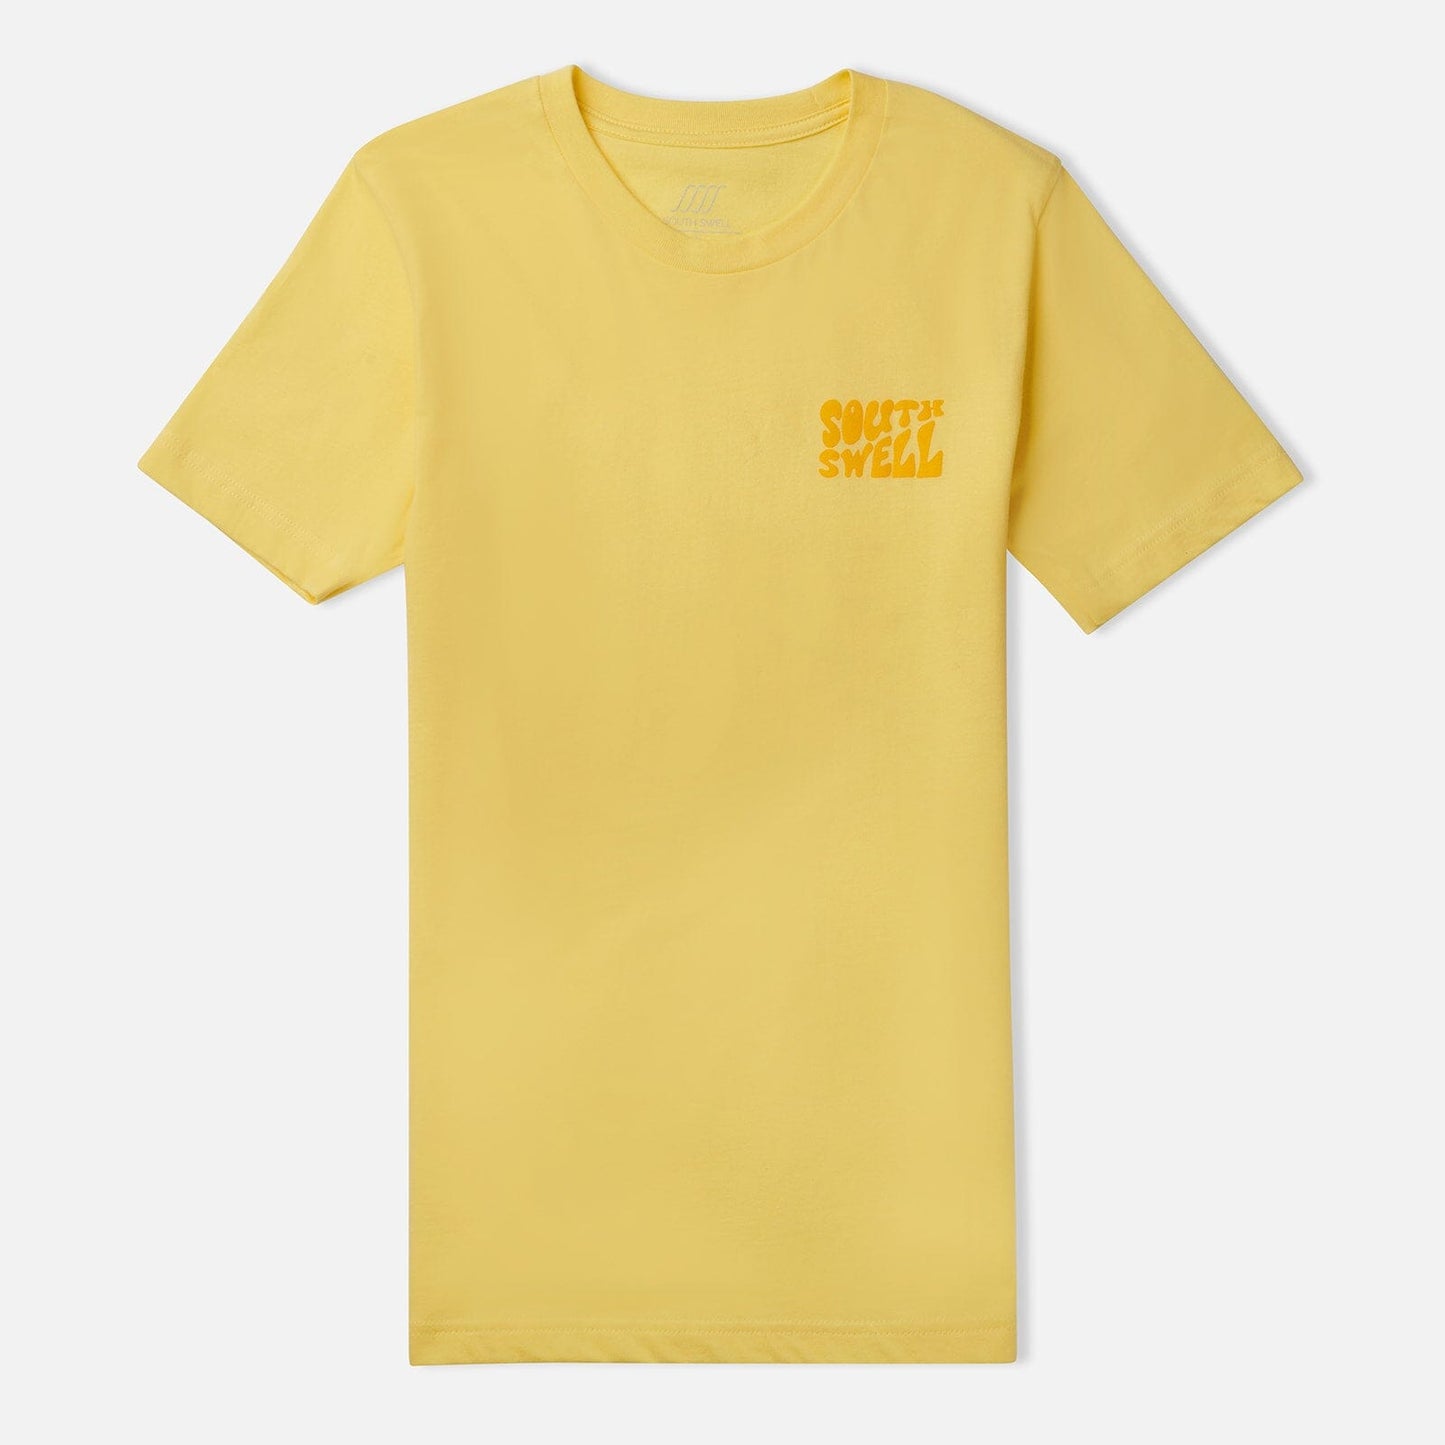 SOUTH SWELL Bubble Text Tee W Tees SOUTH SWELL 